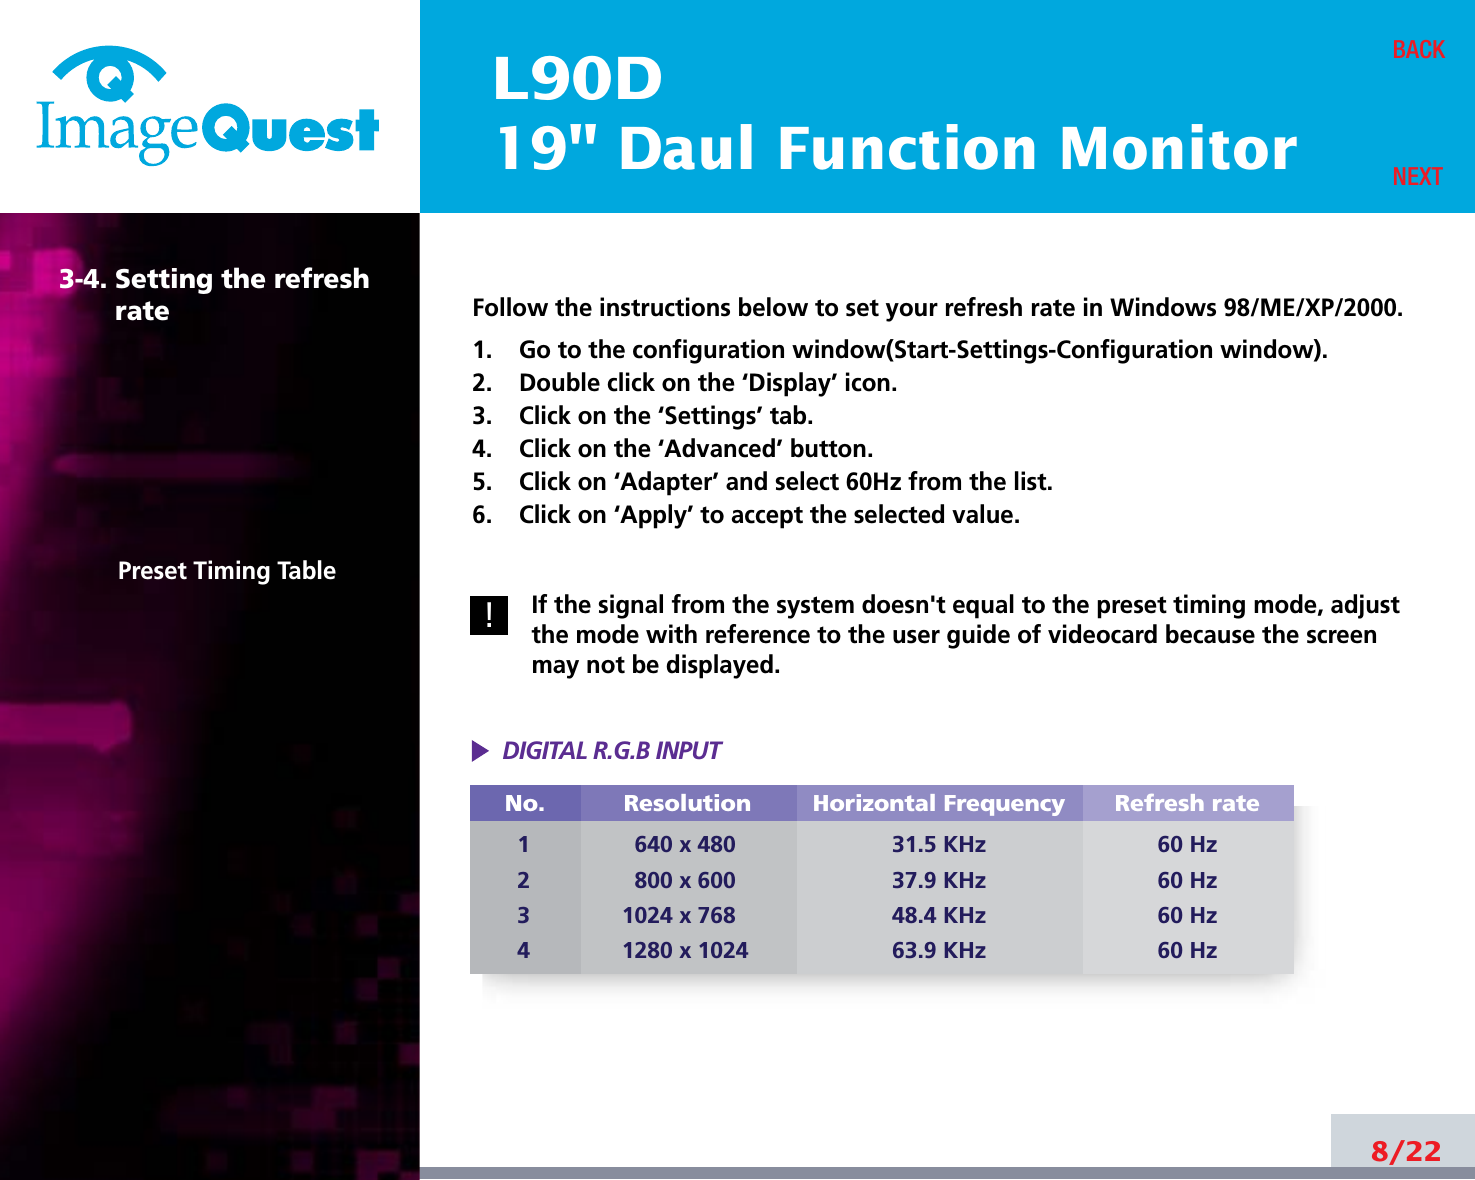 L90D19&quot; Daul Function Monitor8/22BACKNEXT3-4. Setting the refreshratePreset Timing TableFollow the instructions below to set your refresh rate in Windows 98/ME/XP/2000.1.    Go to the configuration window(Start-Settings-Configuration window).2.    Double click on the ‘Display’ icon.3.    Click on the ‘Settings’ tab.4.    Click on the ‘Advanced’ button.5.    Click on ‘Adapter’ and select 60Hz from the list.6.    Click on ‘Apply’ to accept the selected value.If the signal from the system doesn&apos;t equal to the preset timing mode, adjustthe mode with reference to the user guide of videocard because the screenmay not be displayed.DIGITAL R.G.B INPUTNo.1234Resolution640 x 480800 x 6001024 x 7681280 x 1024Horizontal Frequency31.5 KHz37.9 KHz48.4 KHz63.9 KHzRefresh rate60 Hz60 Hz60 Hz60 Hz!